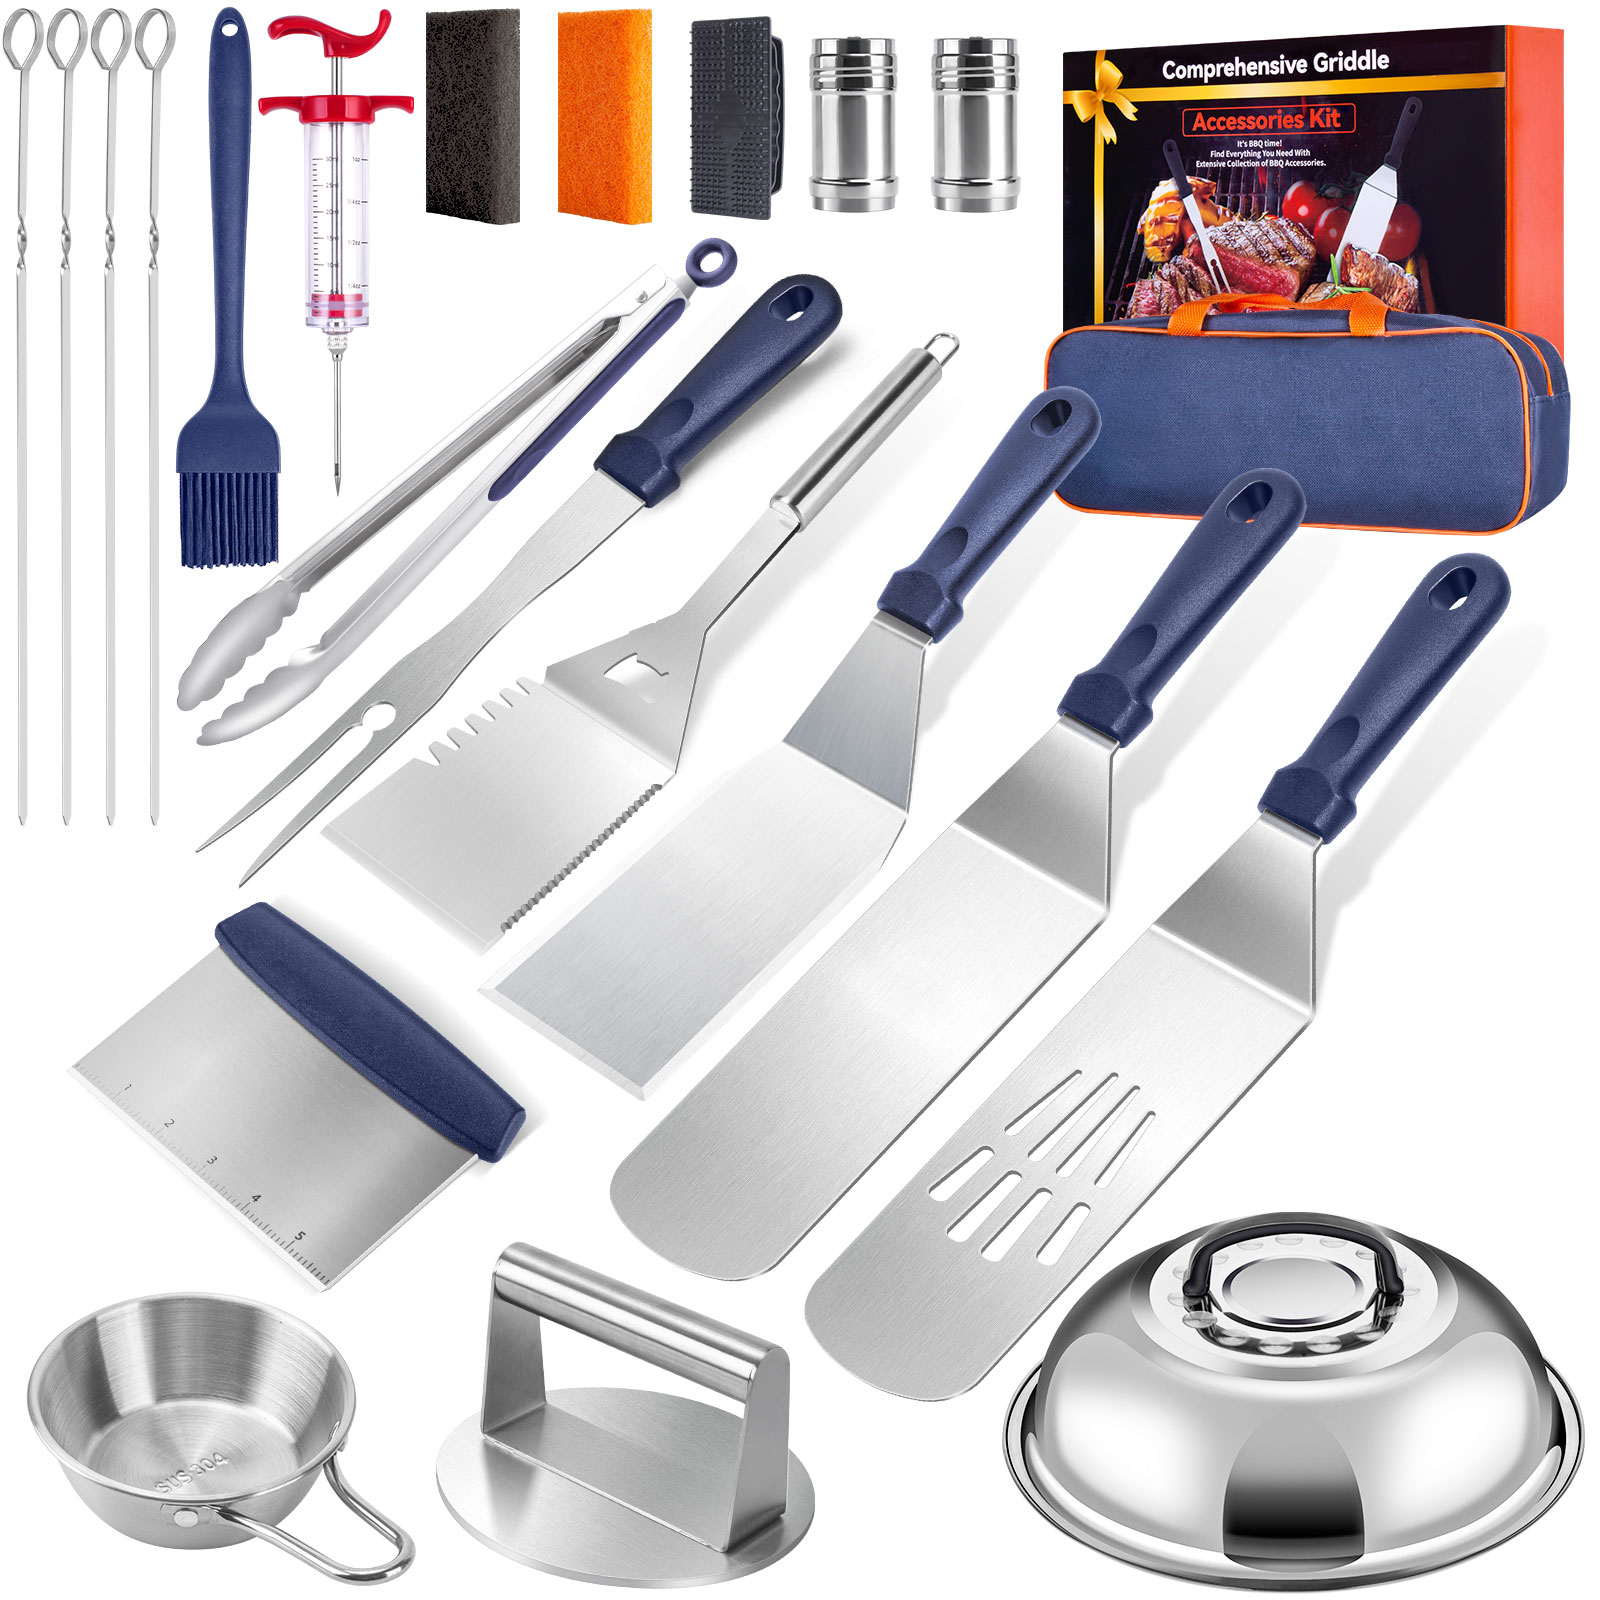 Goutoday Griddle Accessories Set 22Pcs, for Blackstone BBQ Cooking Grill Tool Set - image 1 of 10